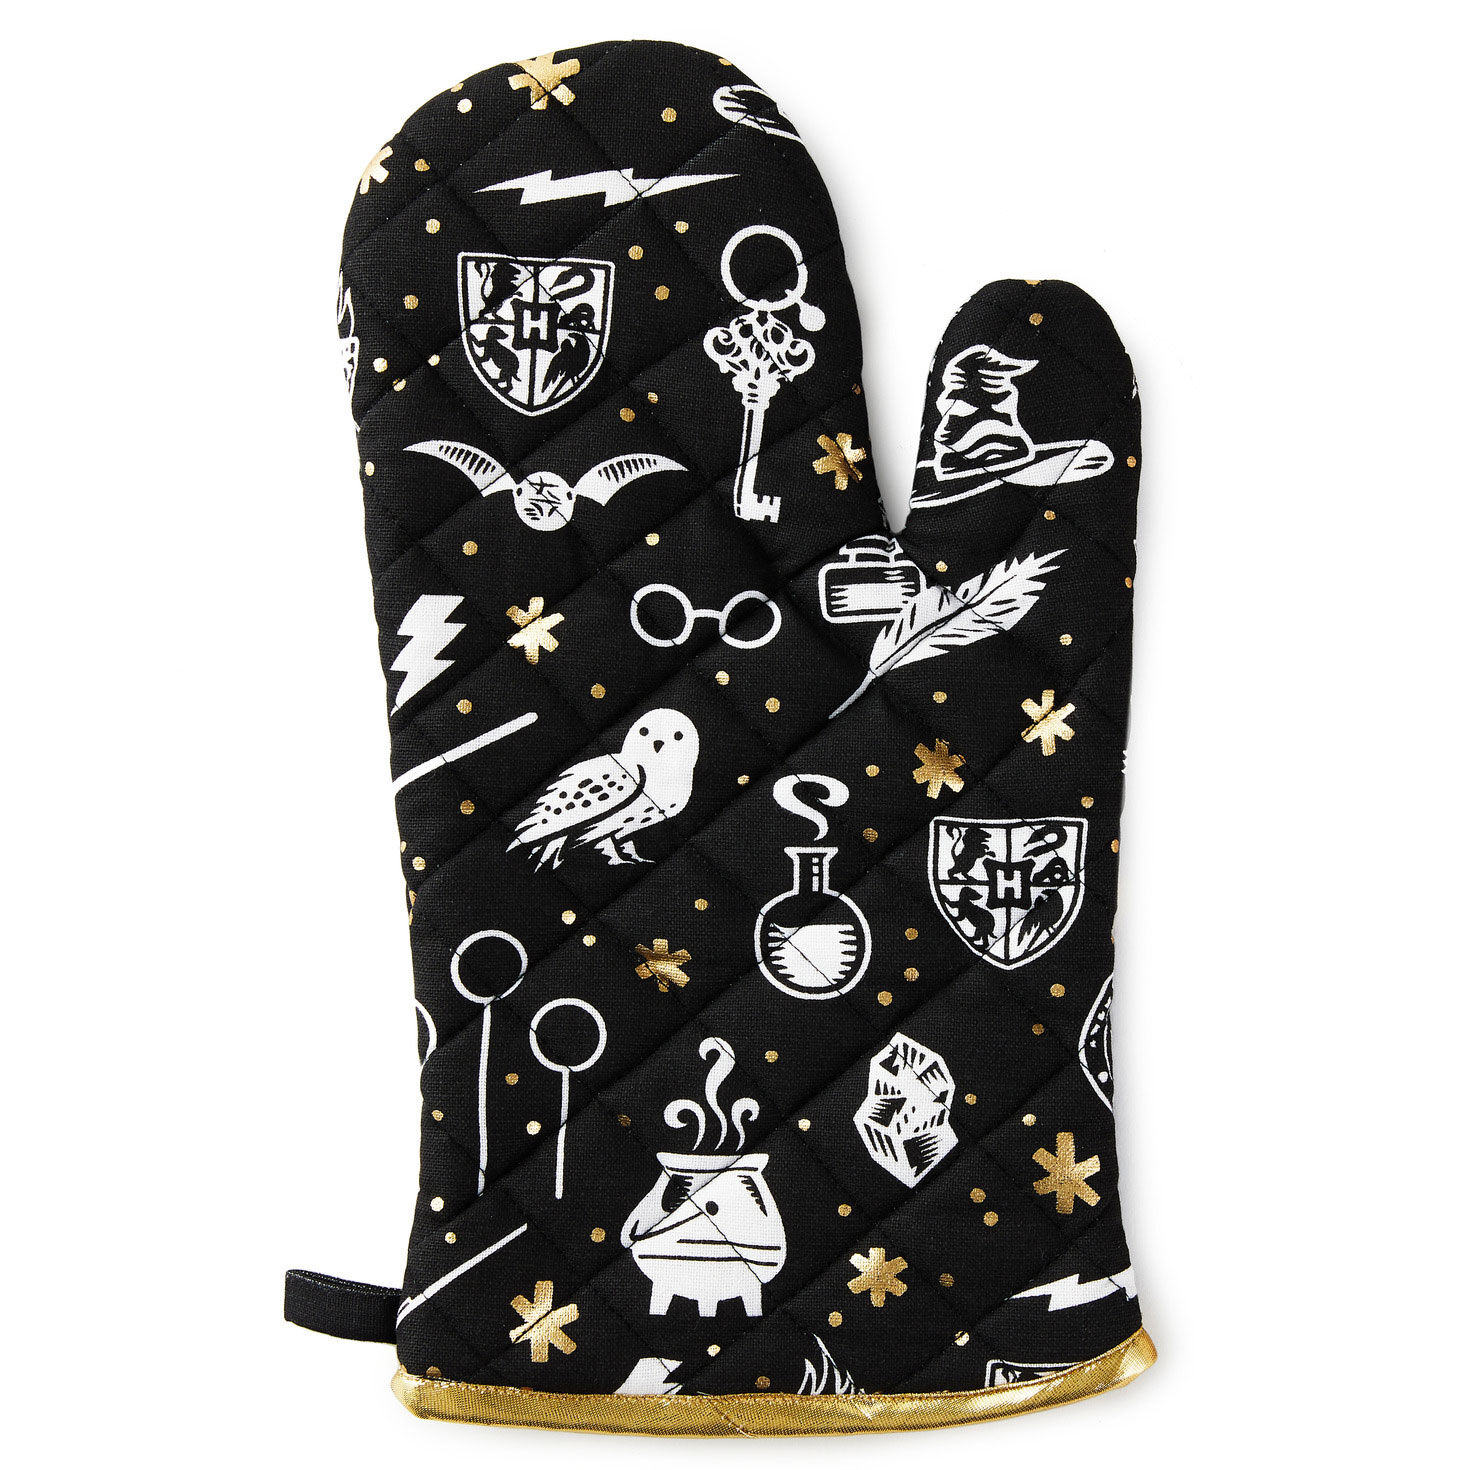 https://www.hallmark.com/dw/image/v2/AALB_PRD/on/demandware.static/-/Sites-hallmark-master/default/dw044deca4/images/finished-goods/products/1HPO1102/Black-Oven-Mitt-With-Harry-Potter-Icons-Design_1HPO1102_01.jpg?sfrm=jpg